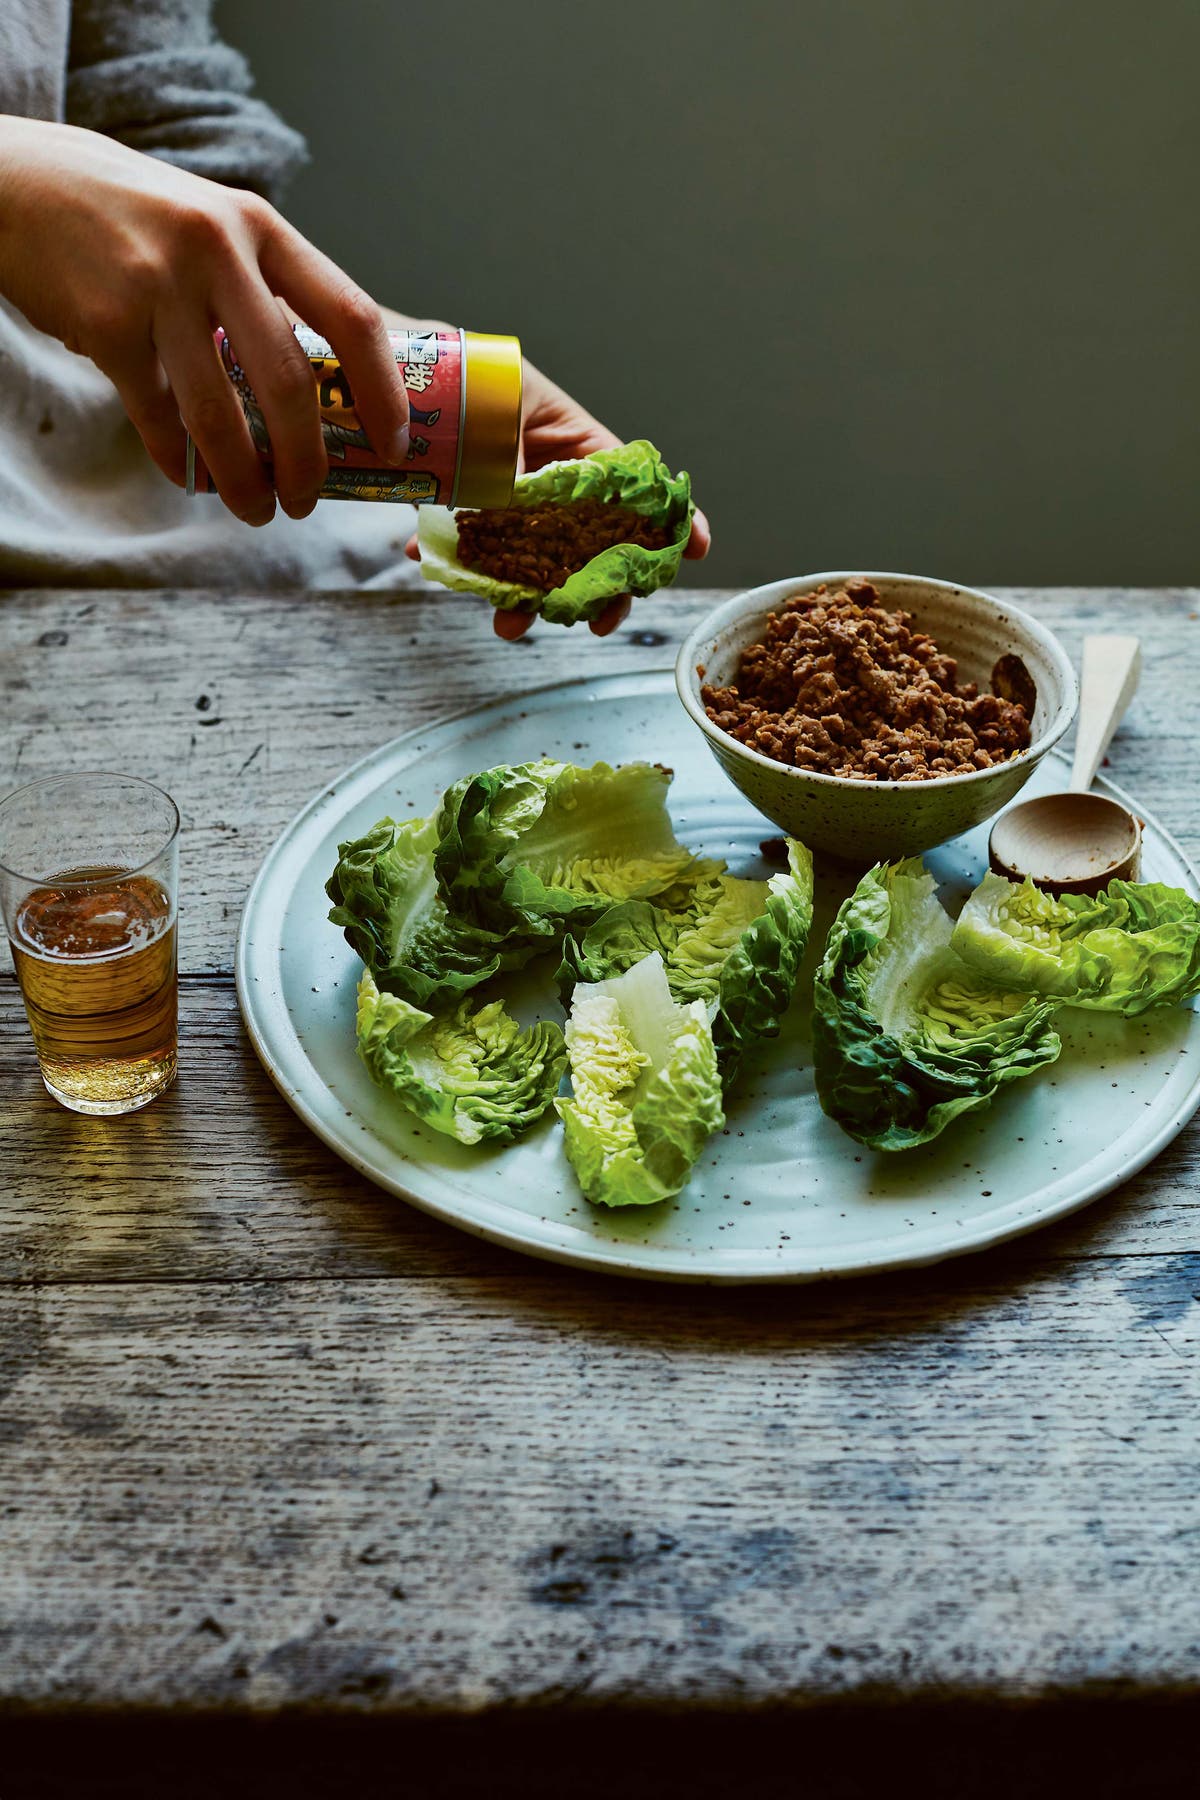 Japanese lettuce wraps: Deliciousness, compounded